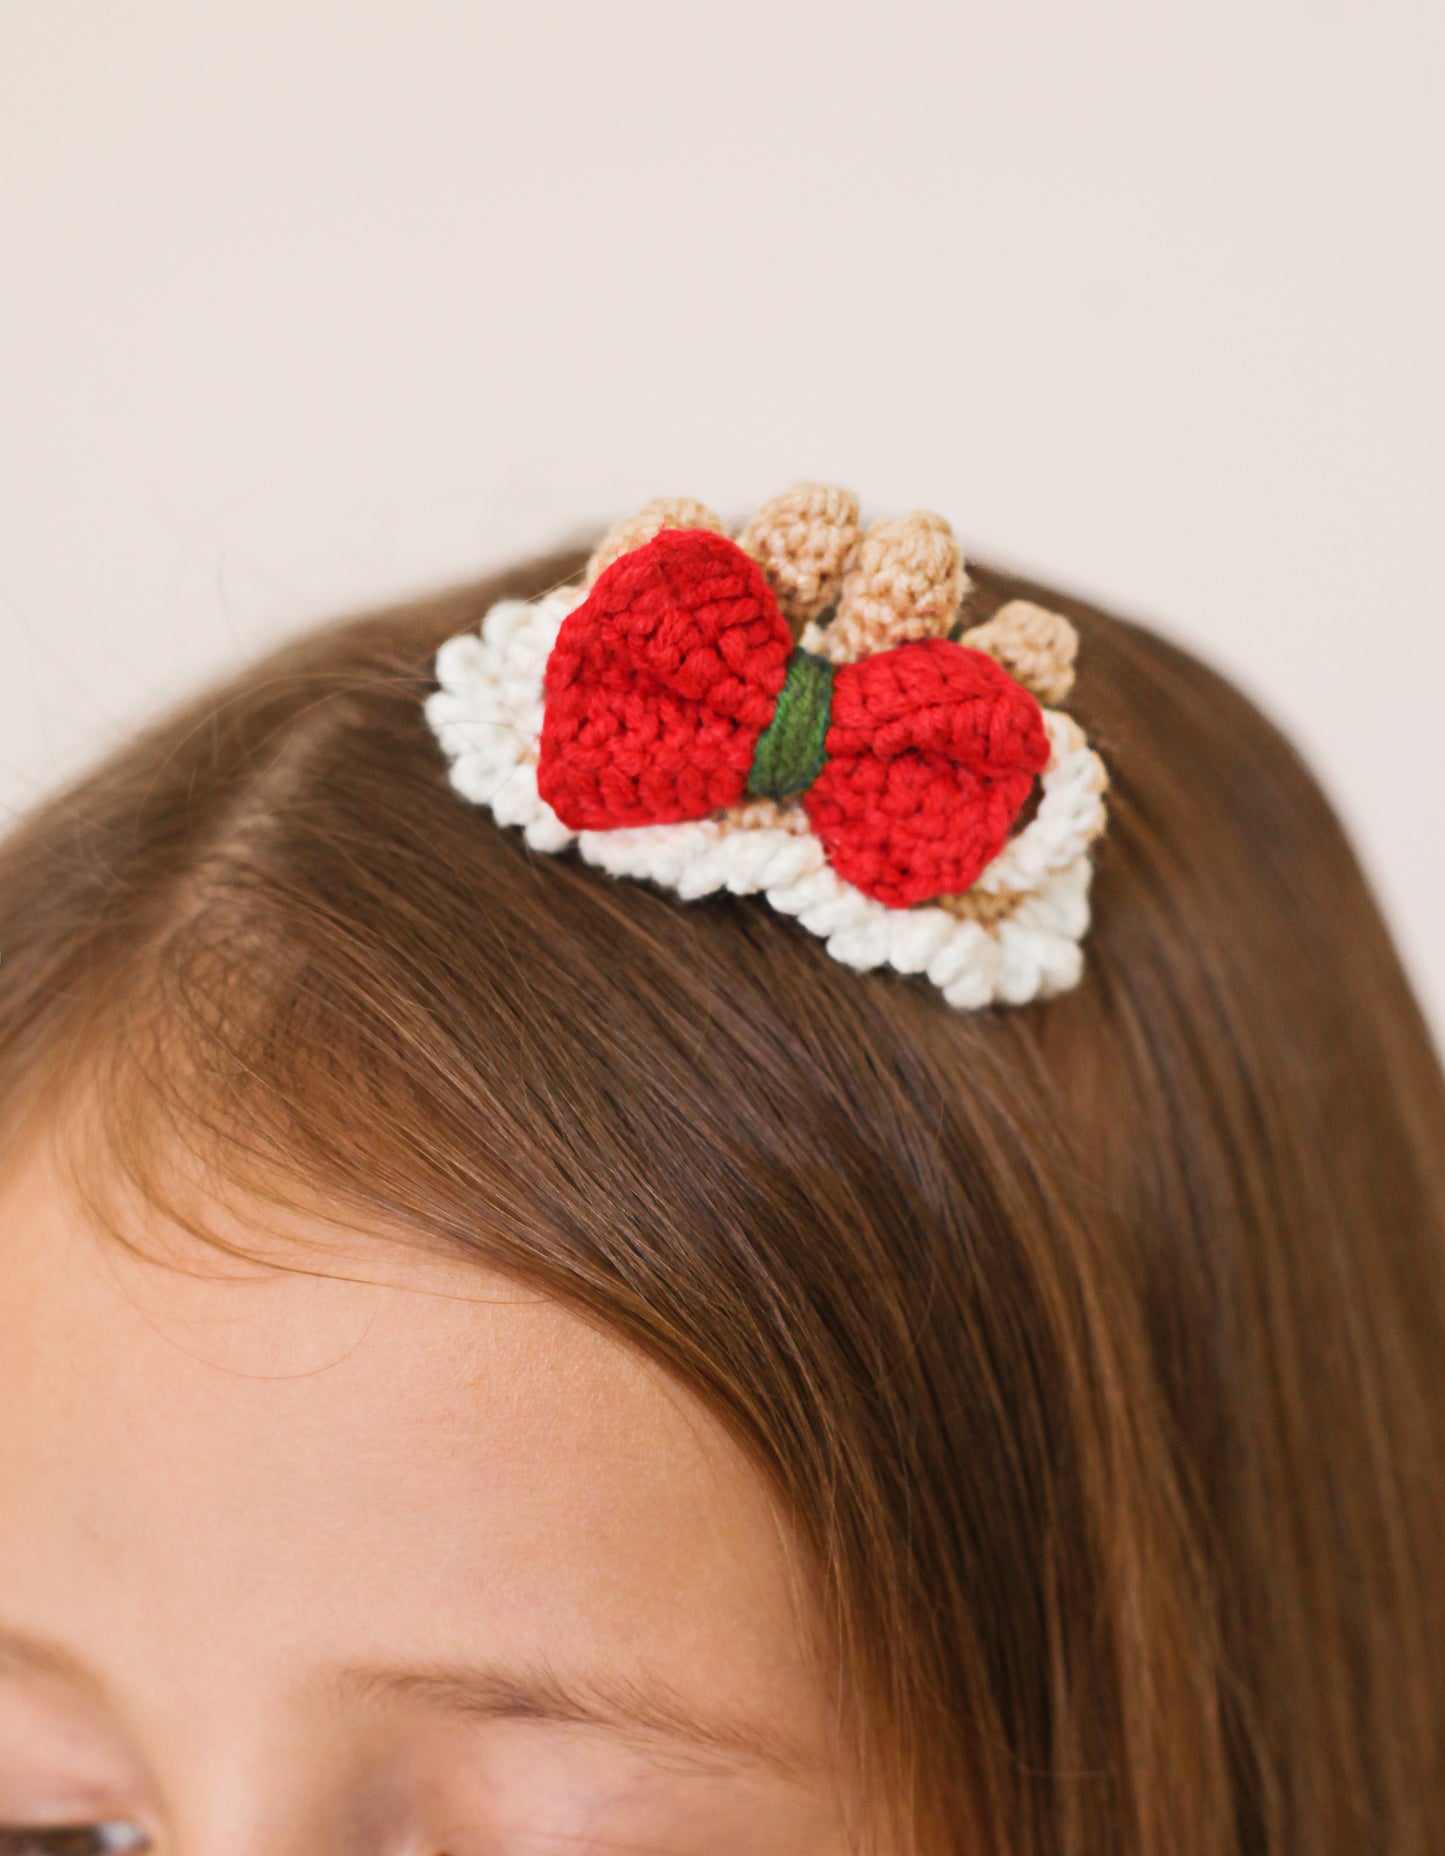 Christmas Trendy Girls' Gifts : Crochet Hair Clips . Barrettes for Teens, Granddaughters, Newborn Girl Outfits, with Embroidery Designs